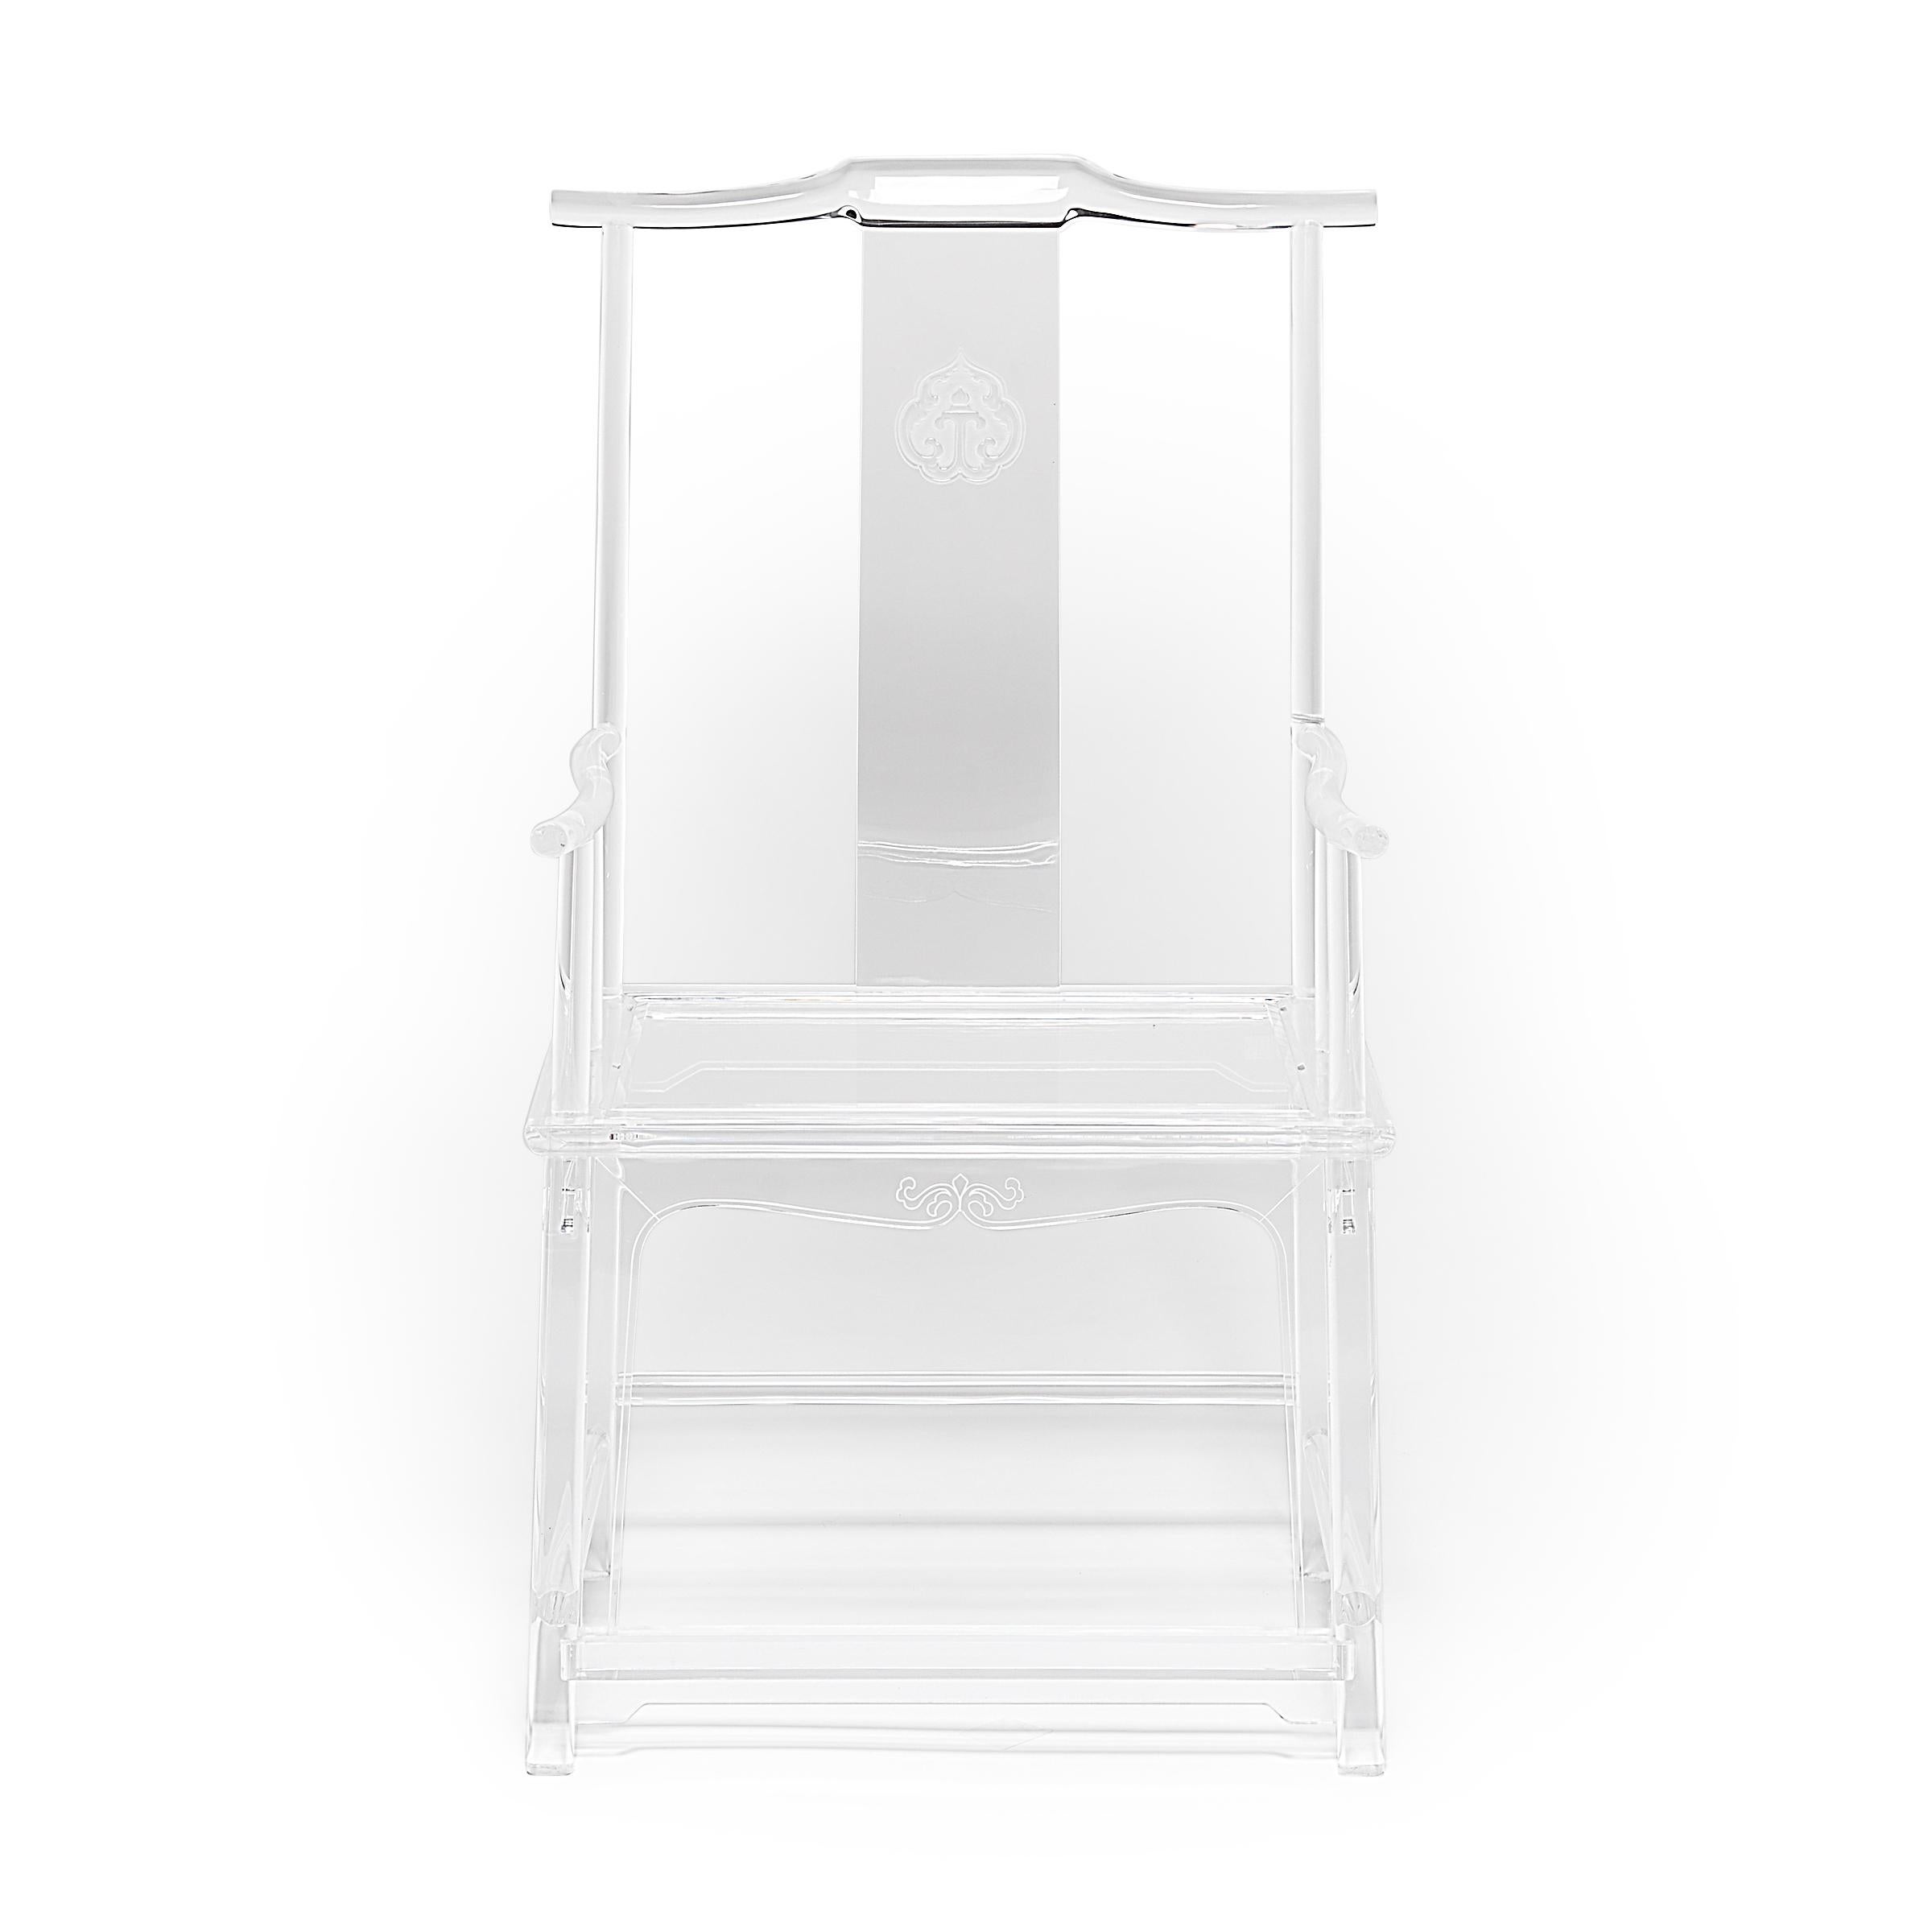 Each limited-edition signed Invisible Administrator's chair by artist July Zhou is fashioned after a traditional Ming example. Though most Lucite furniture is injection molded, July's work is created by skilled artisans who heat, join, bend, carve,